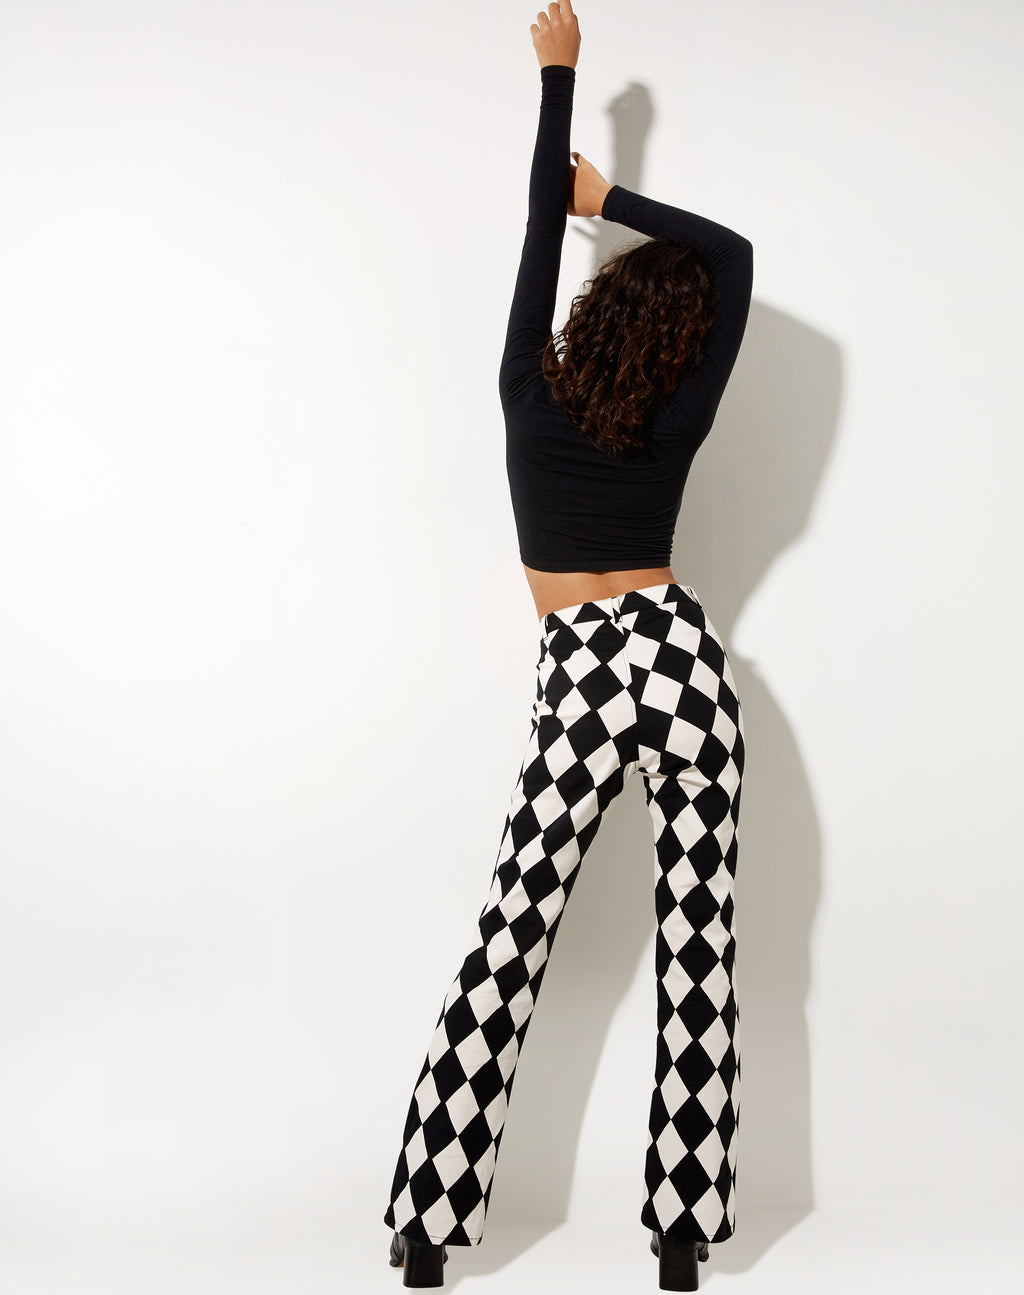 Zoven Flare Trouser in Harlequin Black and White